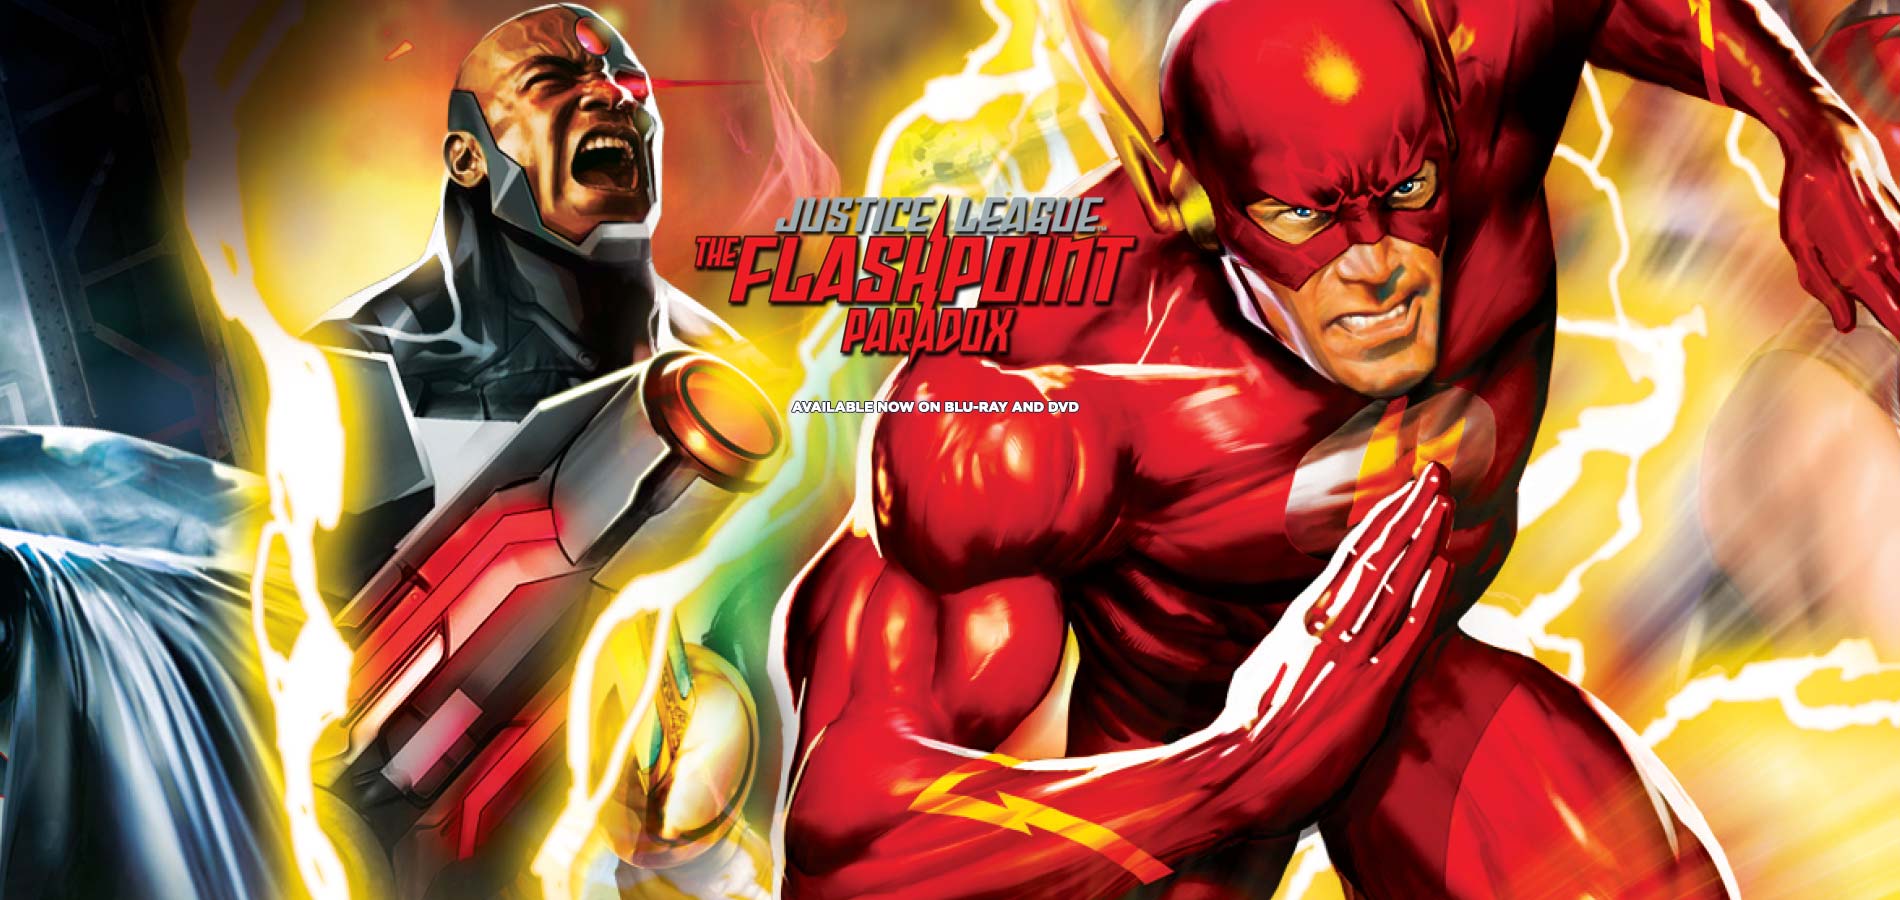 Justice League: The Flashpoint Paradox #2